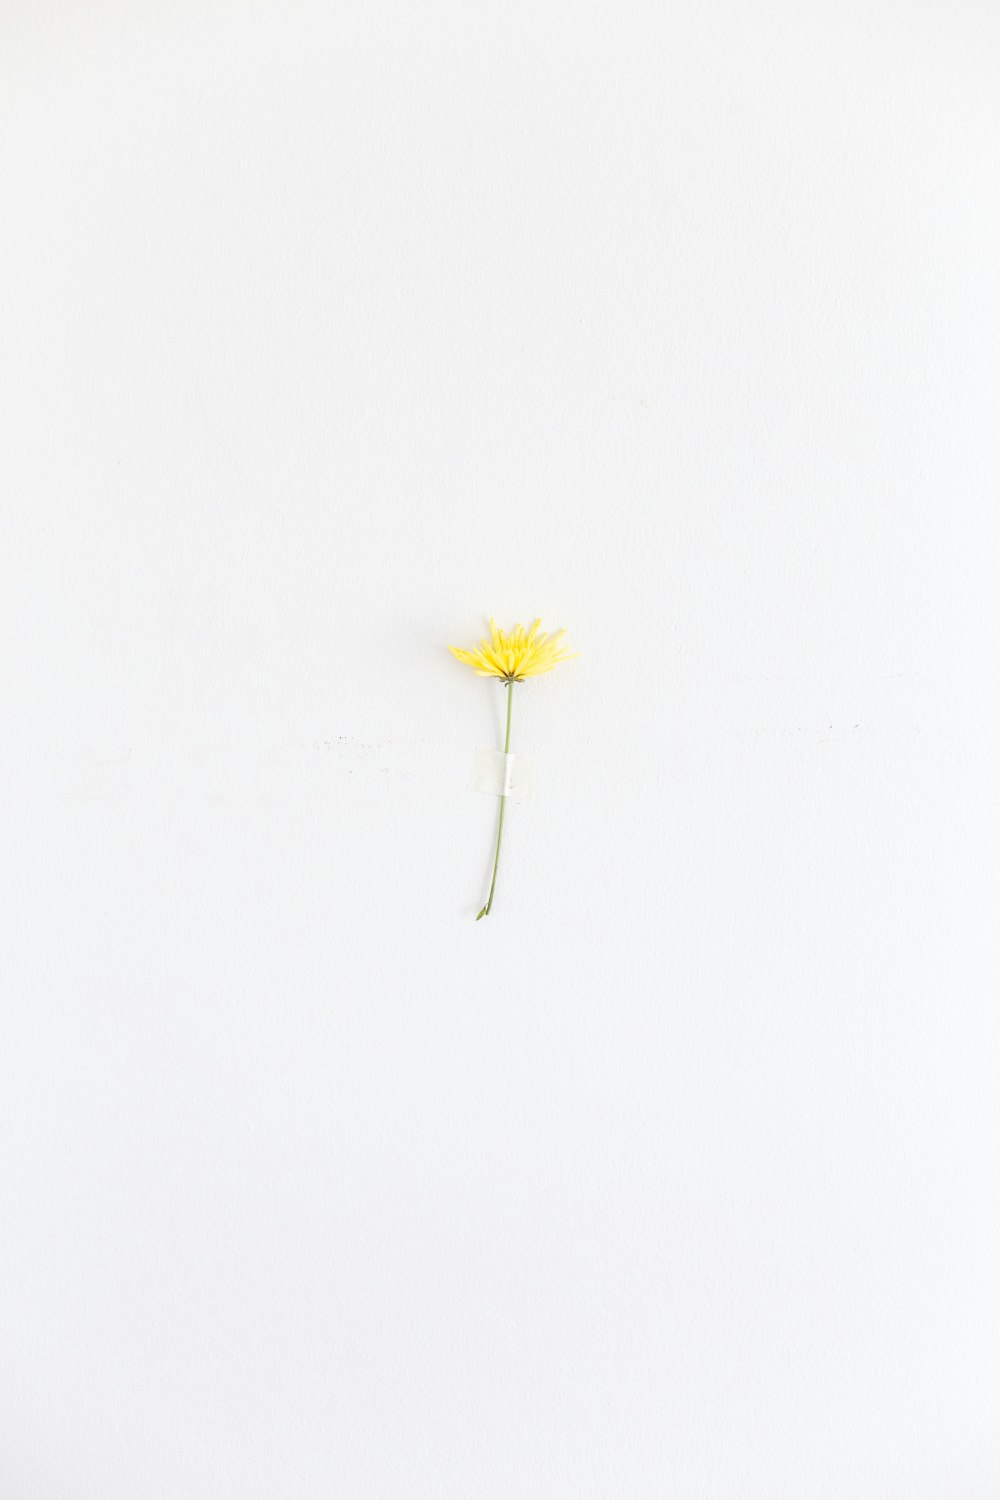 a single yellow flower on a white background